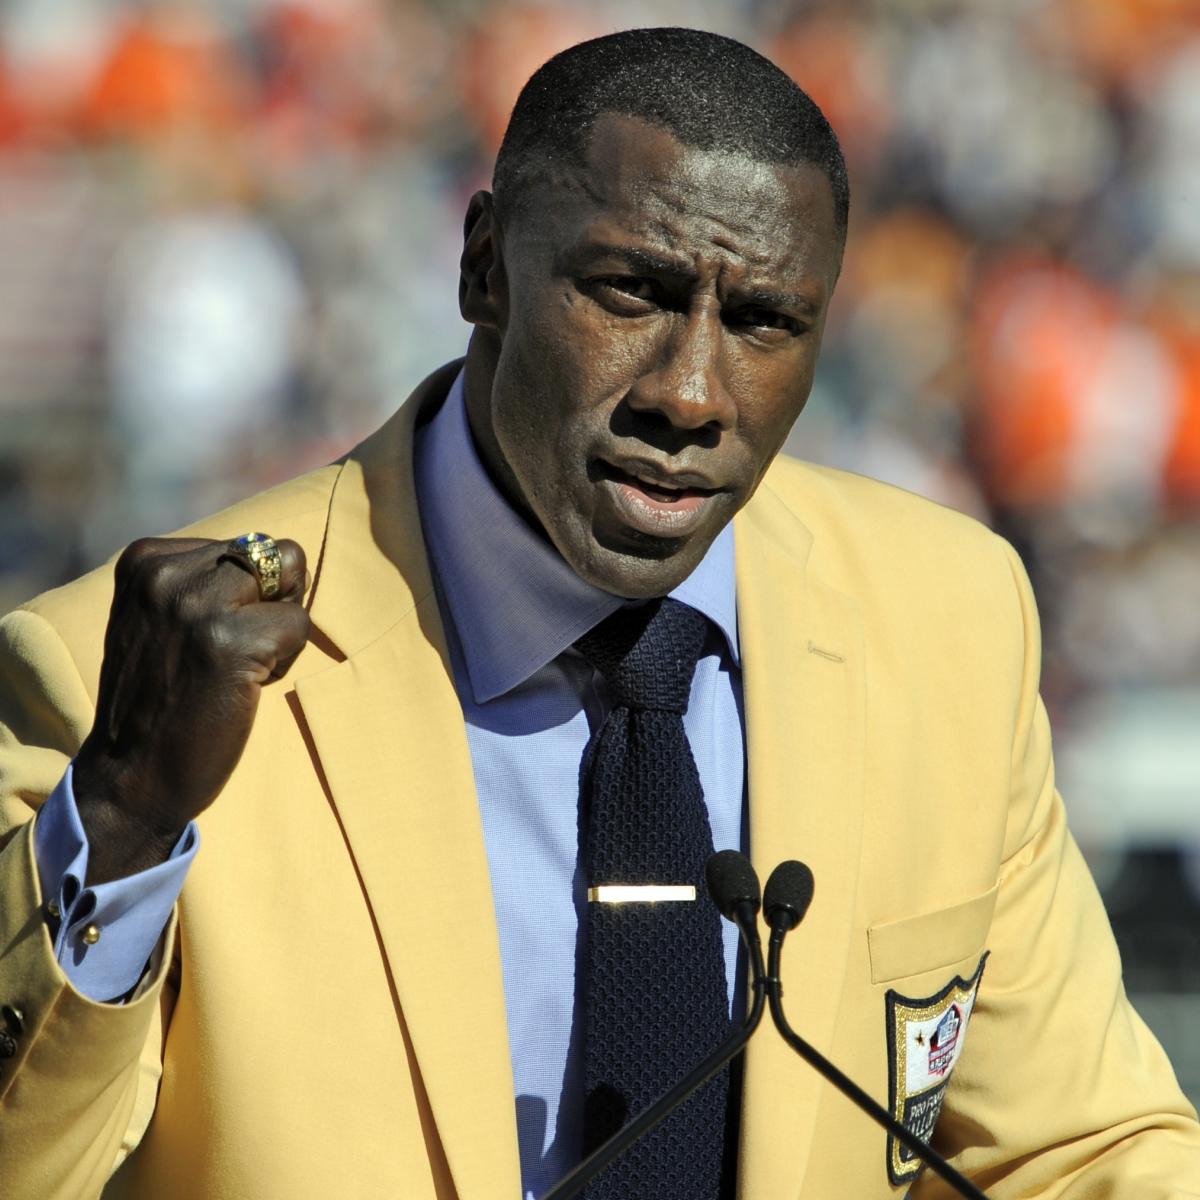 Shannon Sharpe, LeBron Call Out Video of Coach Hitting Youth Football Playe...